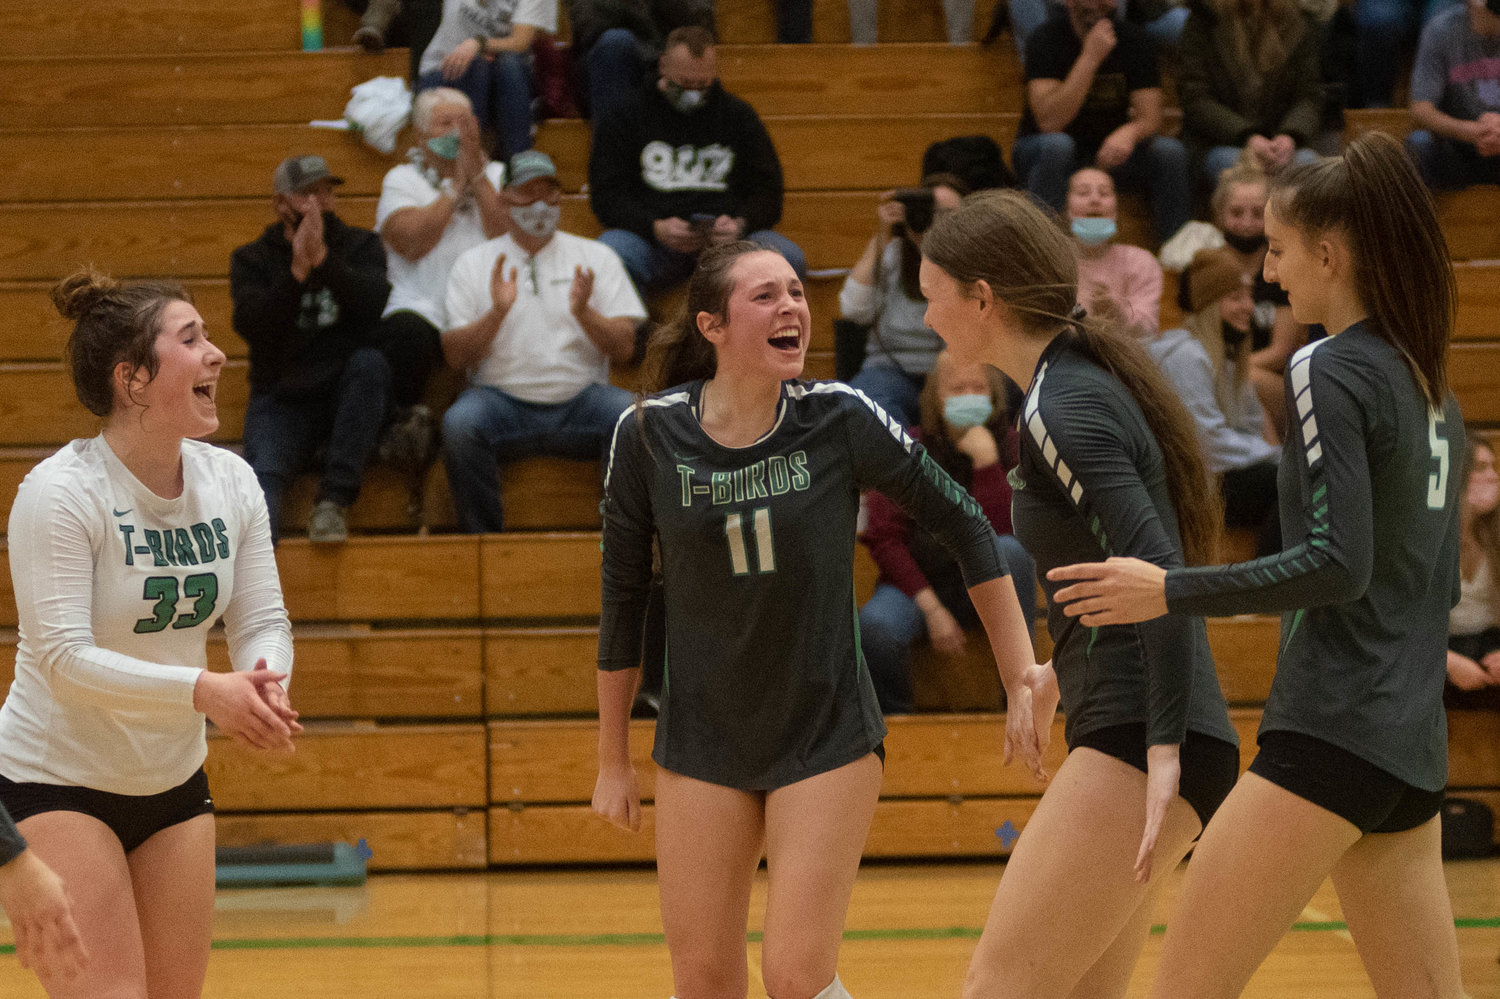 The Tumwater volleyball team celebrates a point against Mark Morris in the opening round of the 2A District 4 tournament Nov. 11.